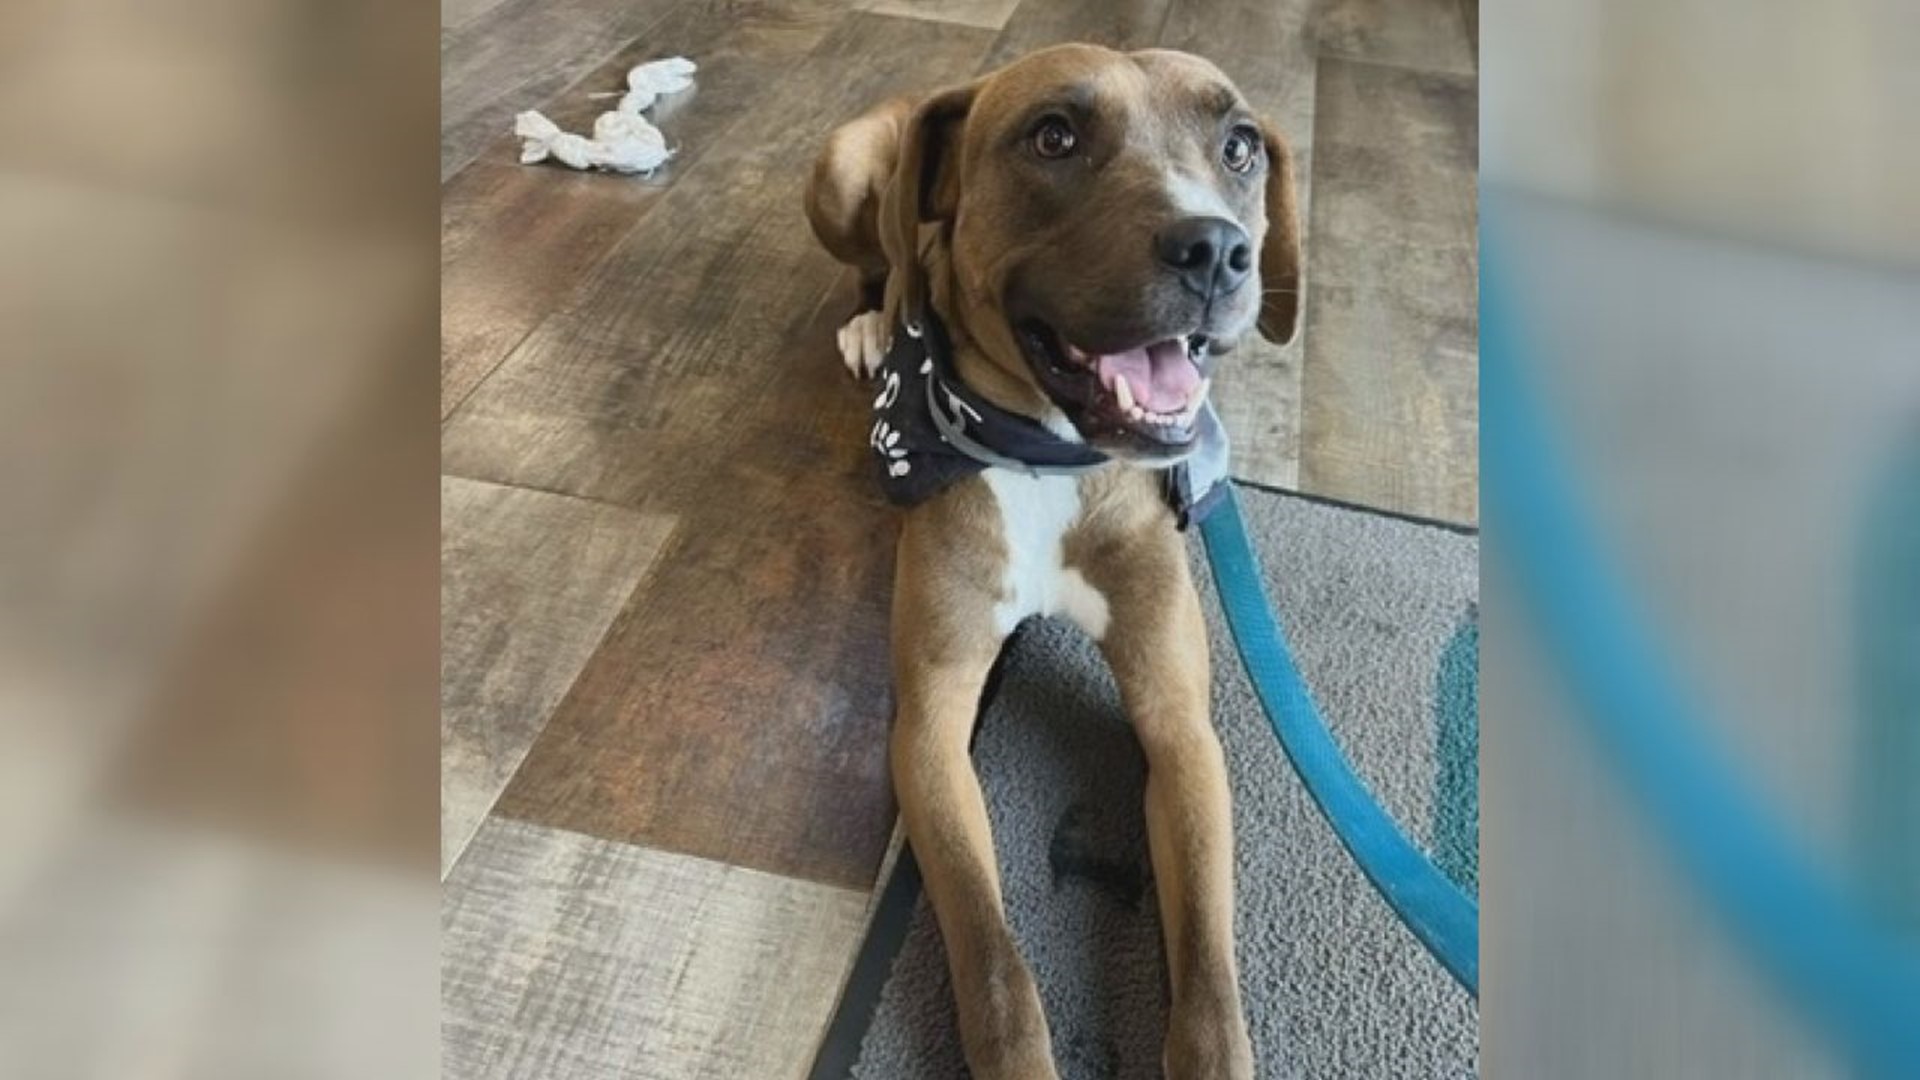 This young boxer mix loves to meet new friends and play with other dogs. He's looking for his forever family at Charlie's Crusaders Pet Rescue.